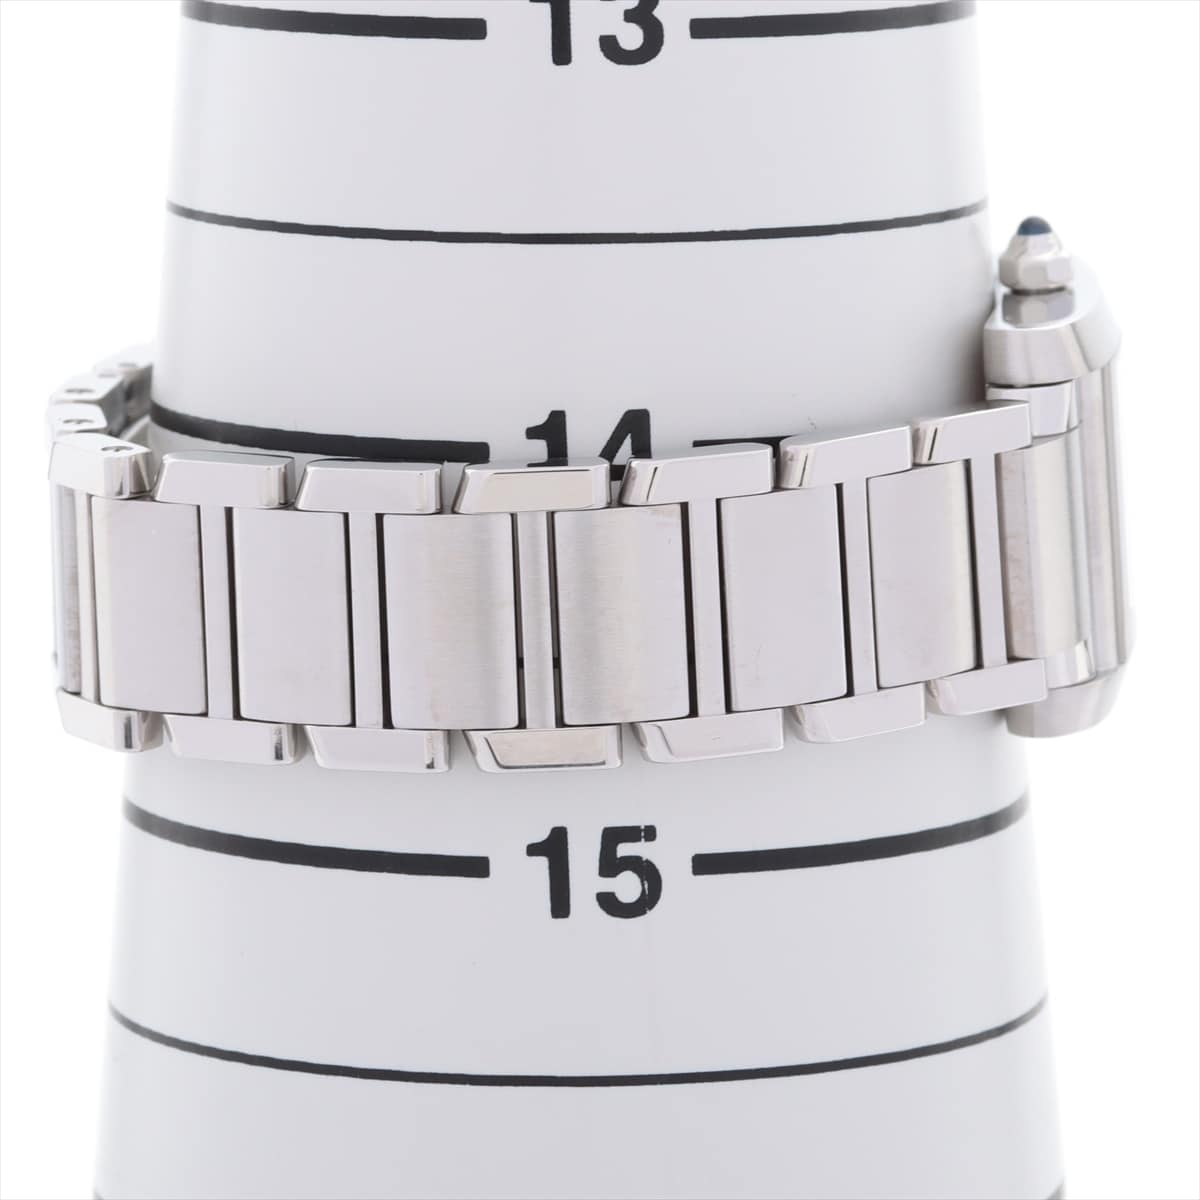 Cartier Tank Francaise SM W51008Q3 SS QZ White-Face Extra-Link3 Inner box only